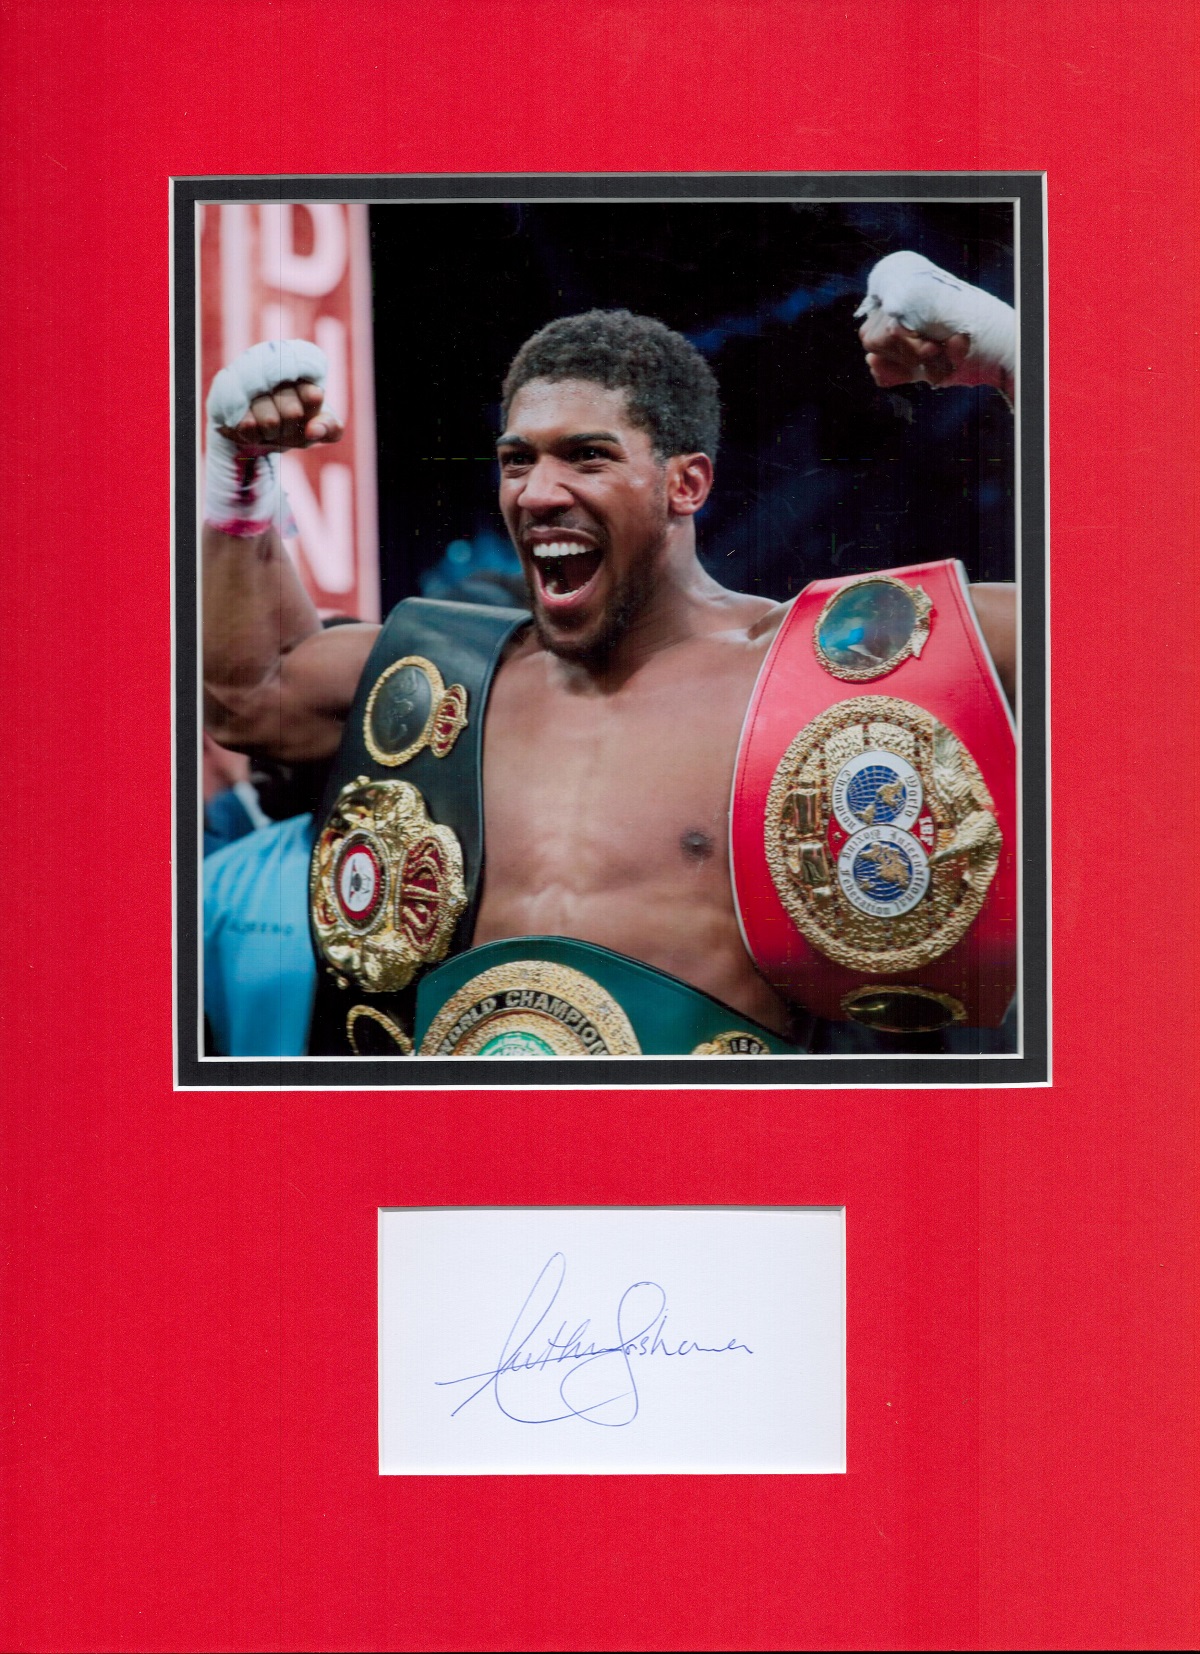 Anthony Joshua Boxer Signed Page Double Mounted Photo Size 12x16. Good condition. All autographs